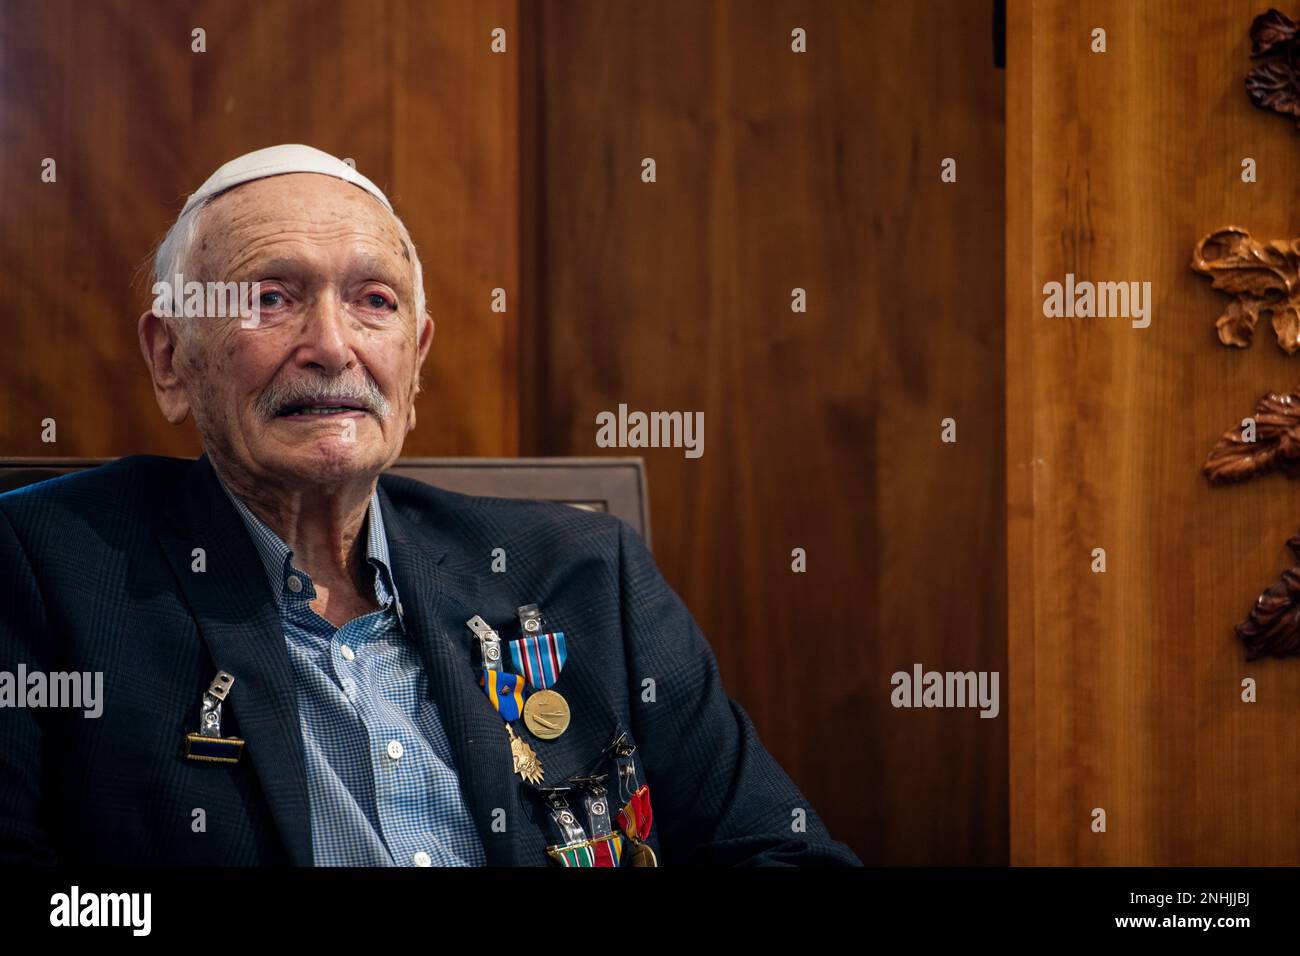 U.S. Army Air Corps 1st Lt. Gerald Teldon, retired, was recognized for his honorable service as a pilot on July 29, 2022, at the Chabad Center for Jewish Life and Learning, San Antonio, Texas. Teldon, born in Bronx, N.Y., in 1924, joined the military in 1944. He completed 62 missions during WWII and the Korean War. Lt. Col. Andrew Stein, 502nd Operations Support Squadron commander, was the presiding officers. The awards presented to Teldon are as follows: the Air Medal; American Campaign Medal; European – African – Middle Eastern Campaign Medal; World War II Victory Medal; National Defense Med Stock Photo